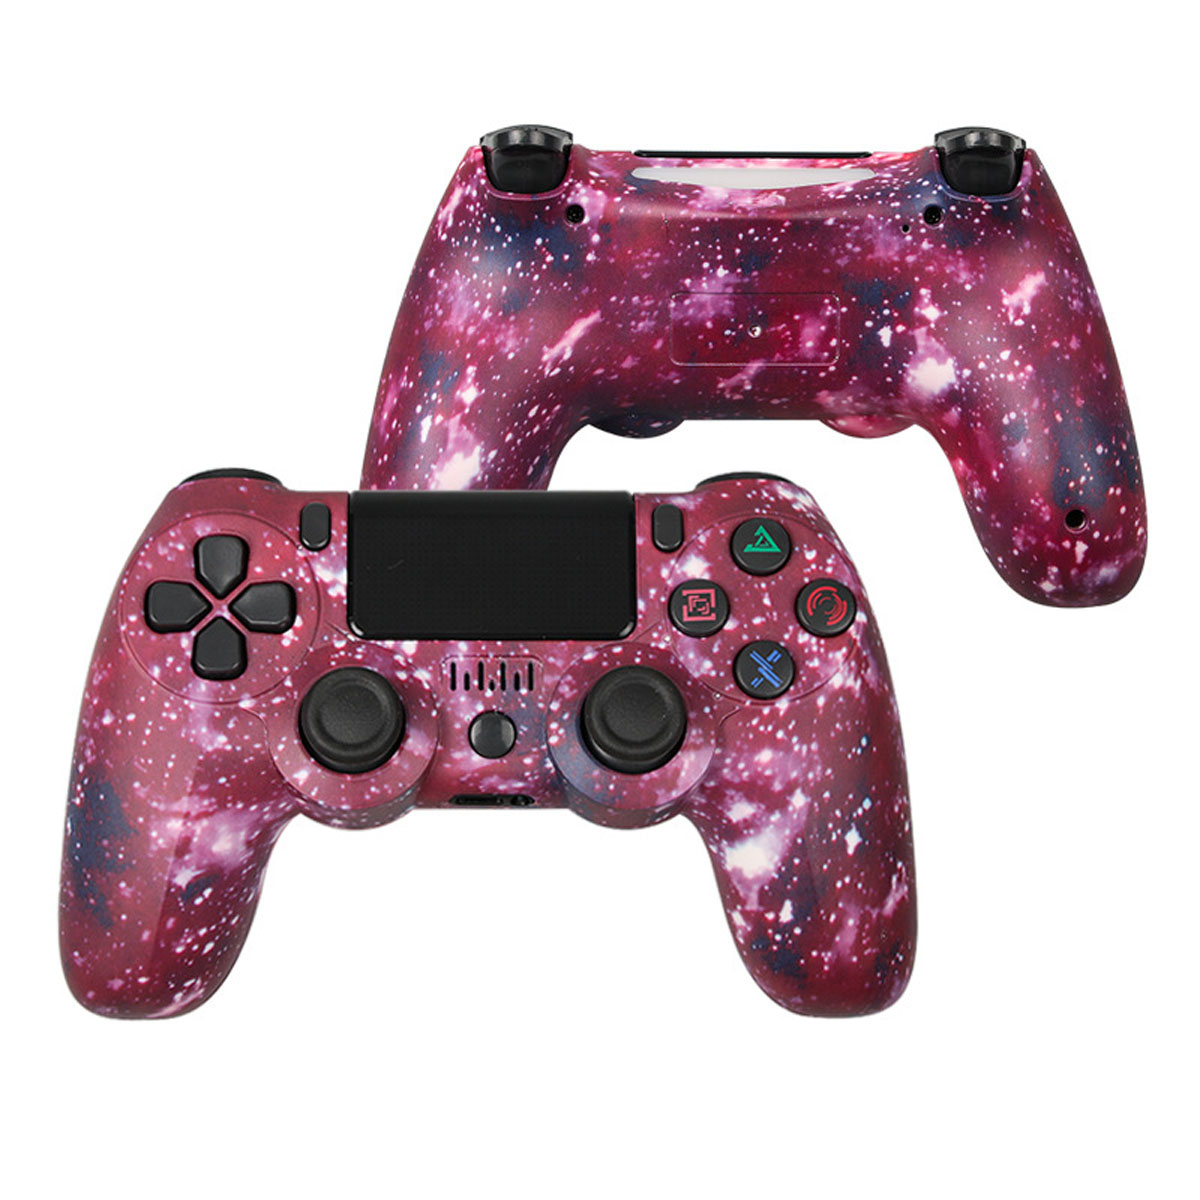 PC/PS3/PS4 Lila Reversible, Lila für Sterne TADOW Controller Stern Gamepad, Bluetooth